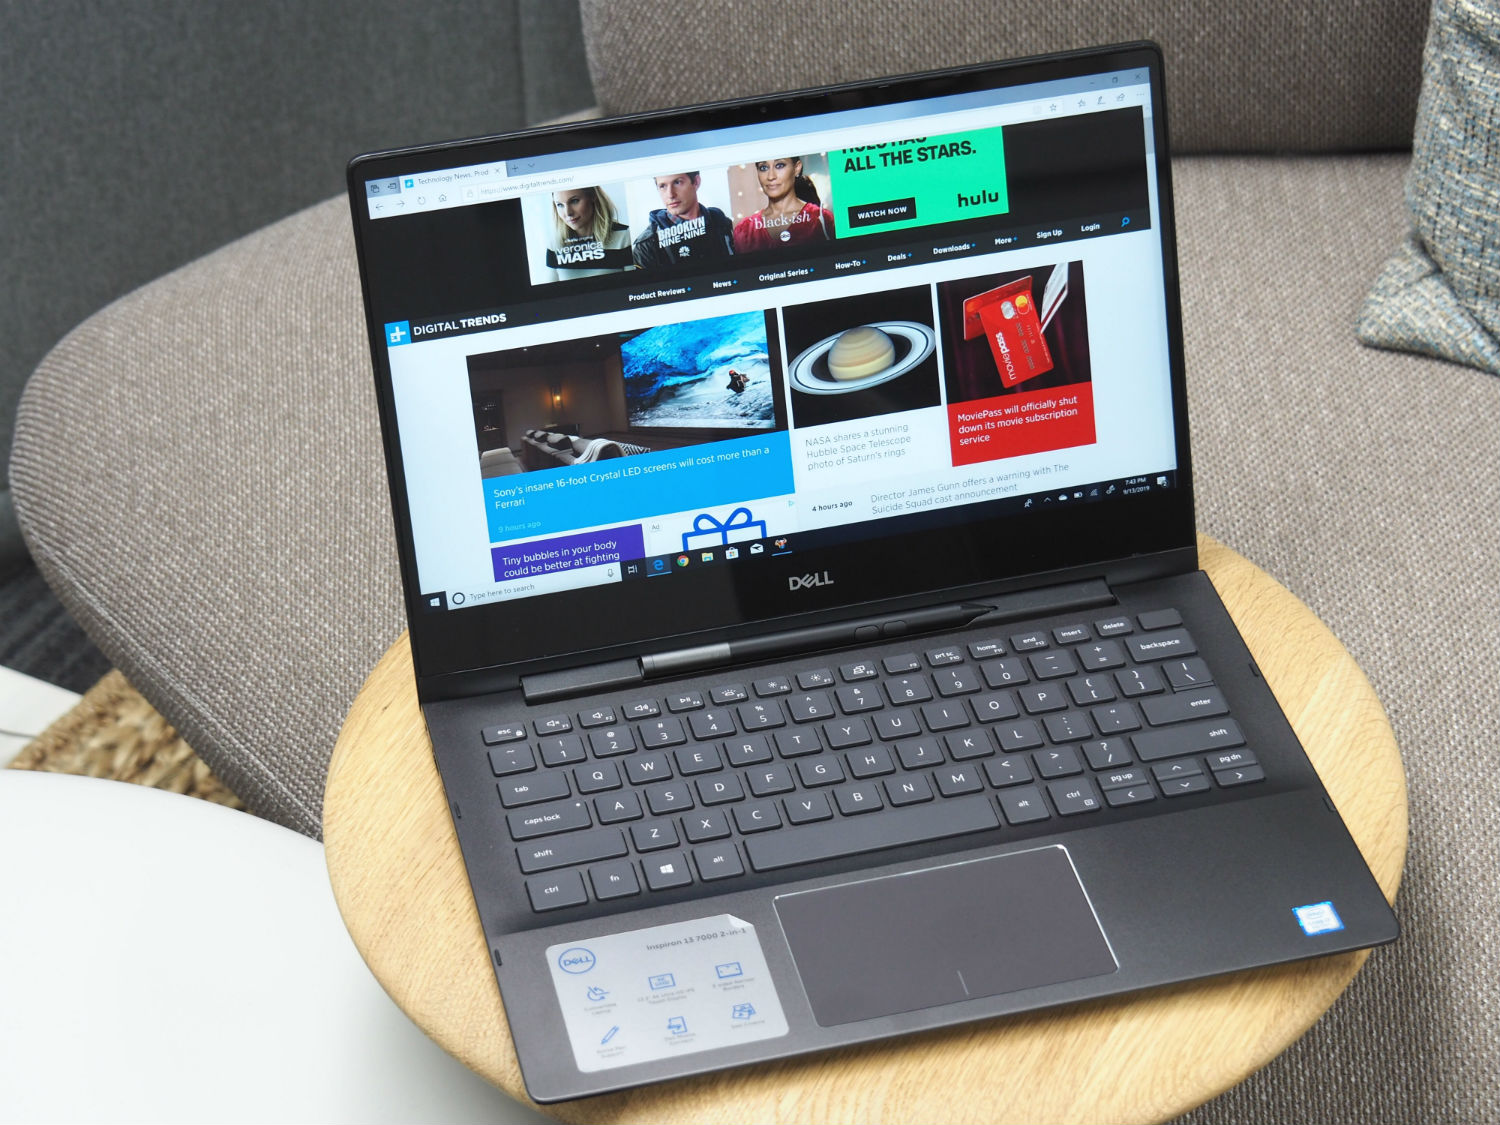 Dell Inspiron 13 7000 2-in-1 Black Edition Review | Digital Trends